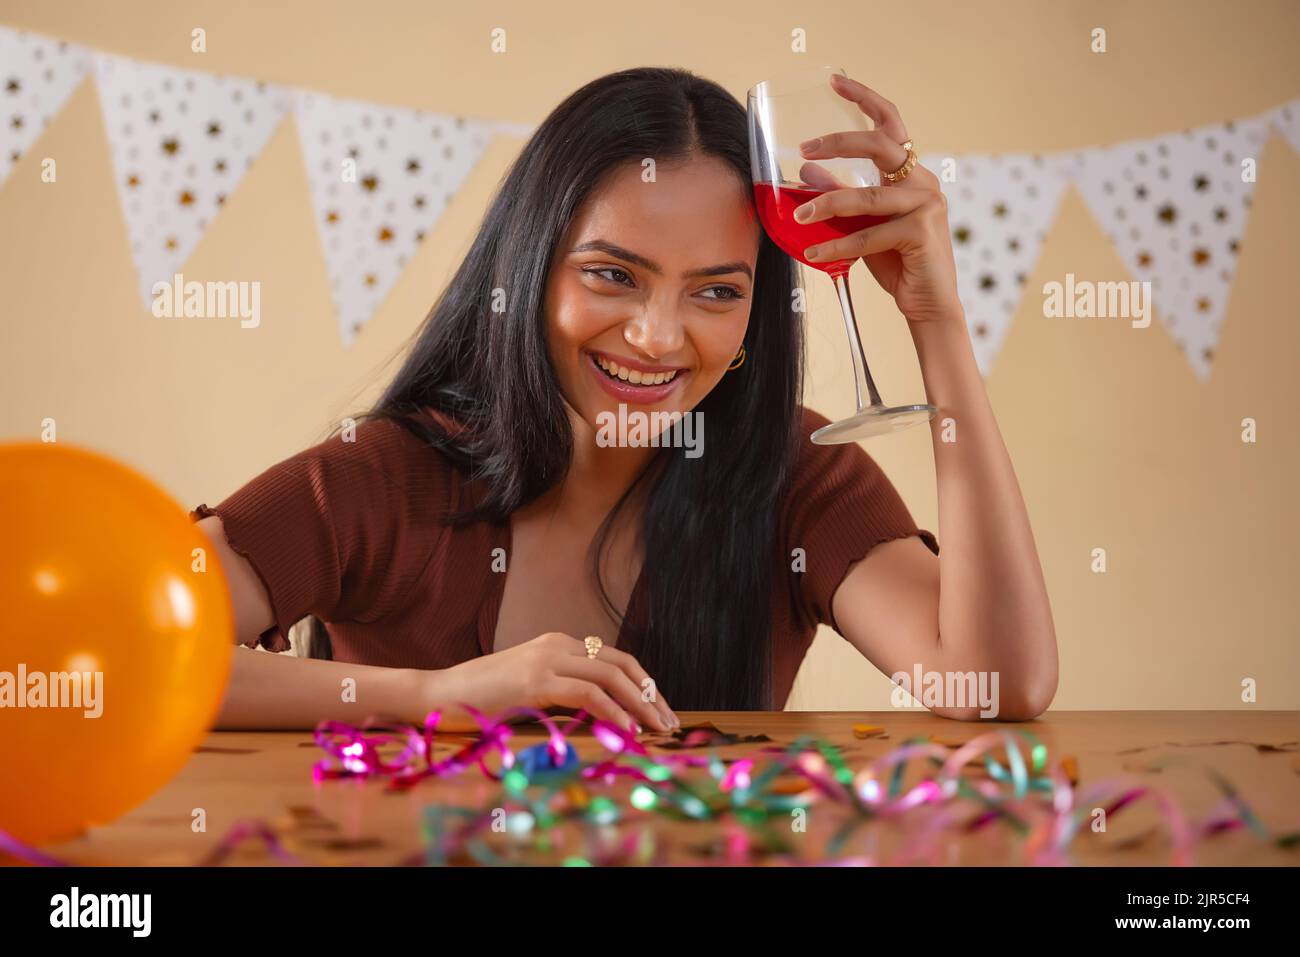 Portrait of young woman celebrating with a glass of wine Stock Photo